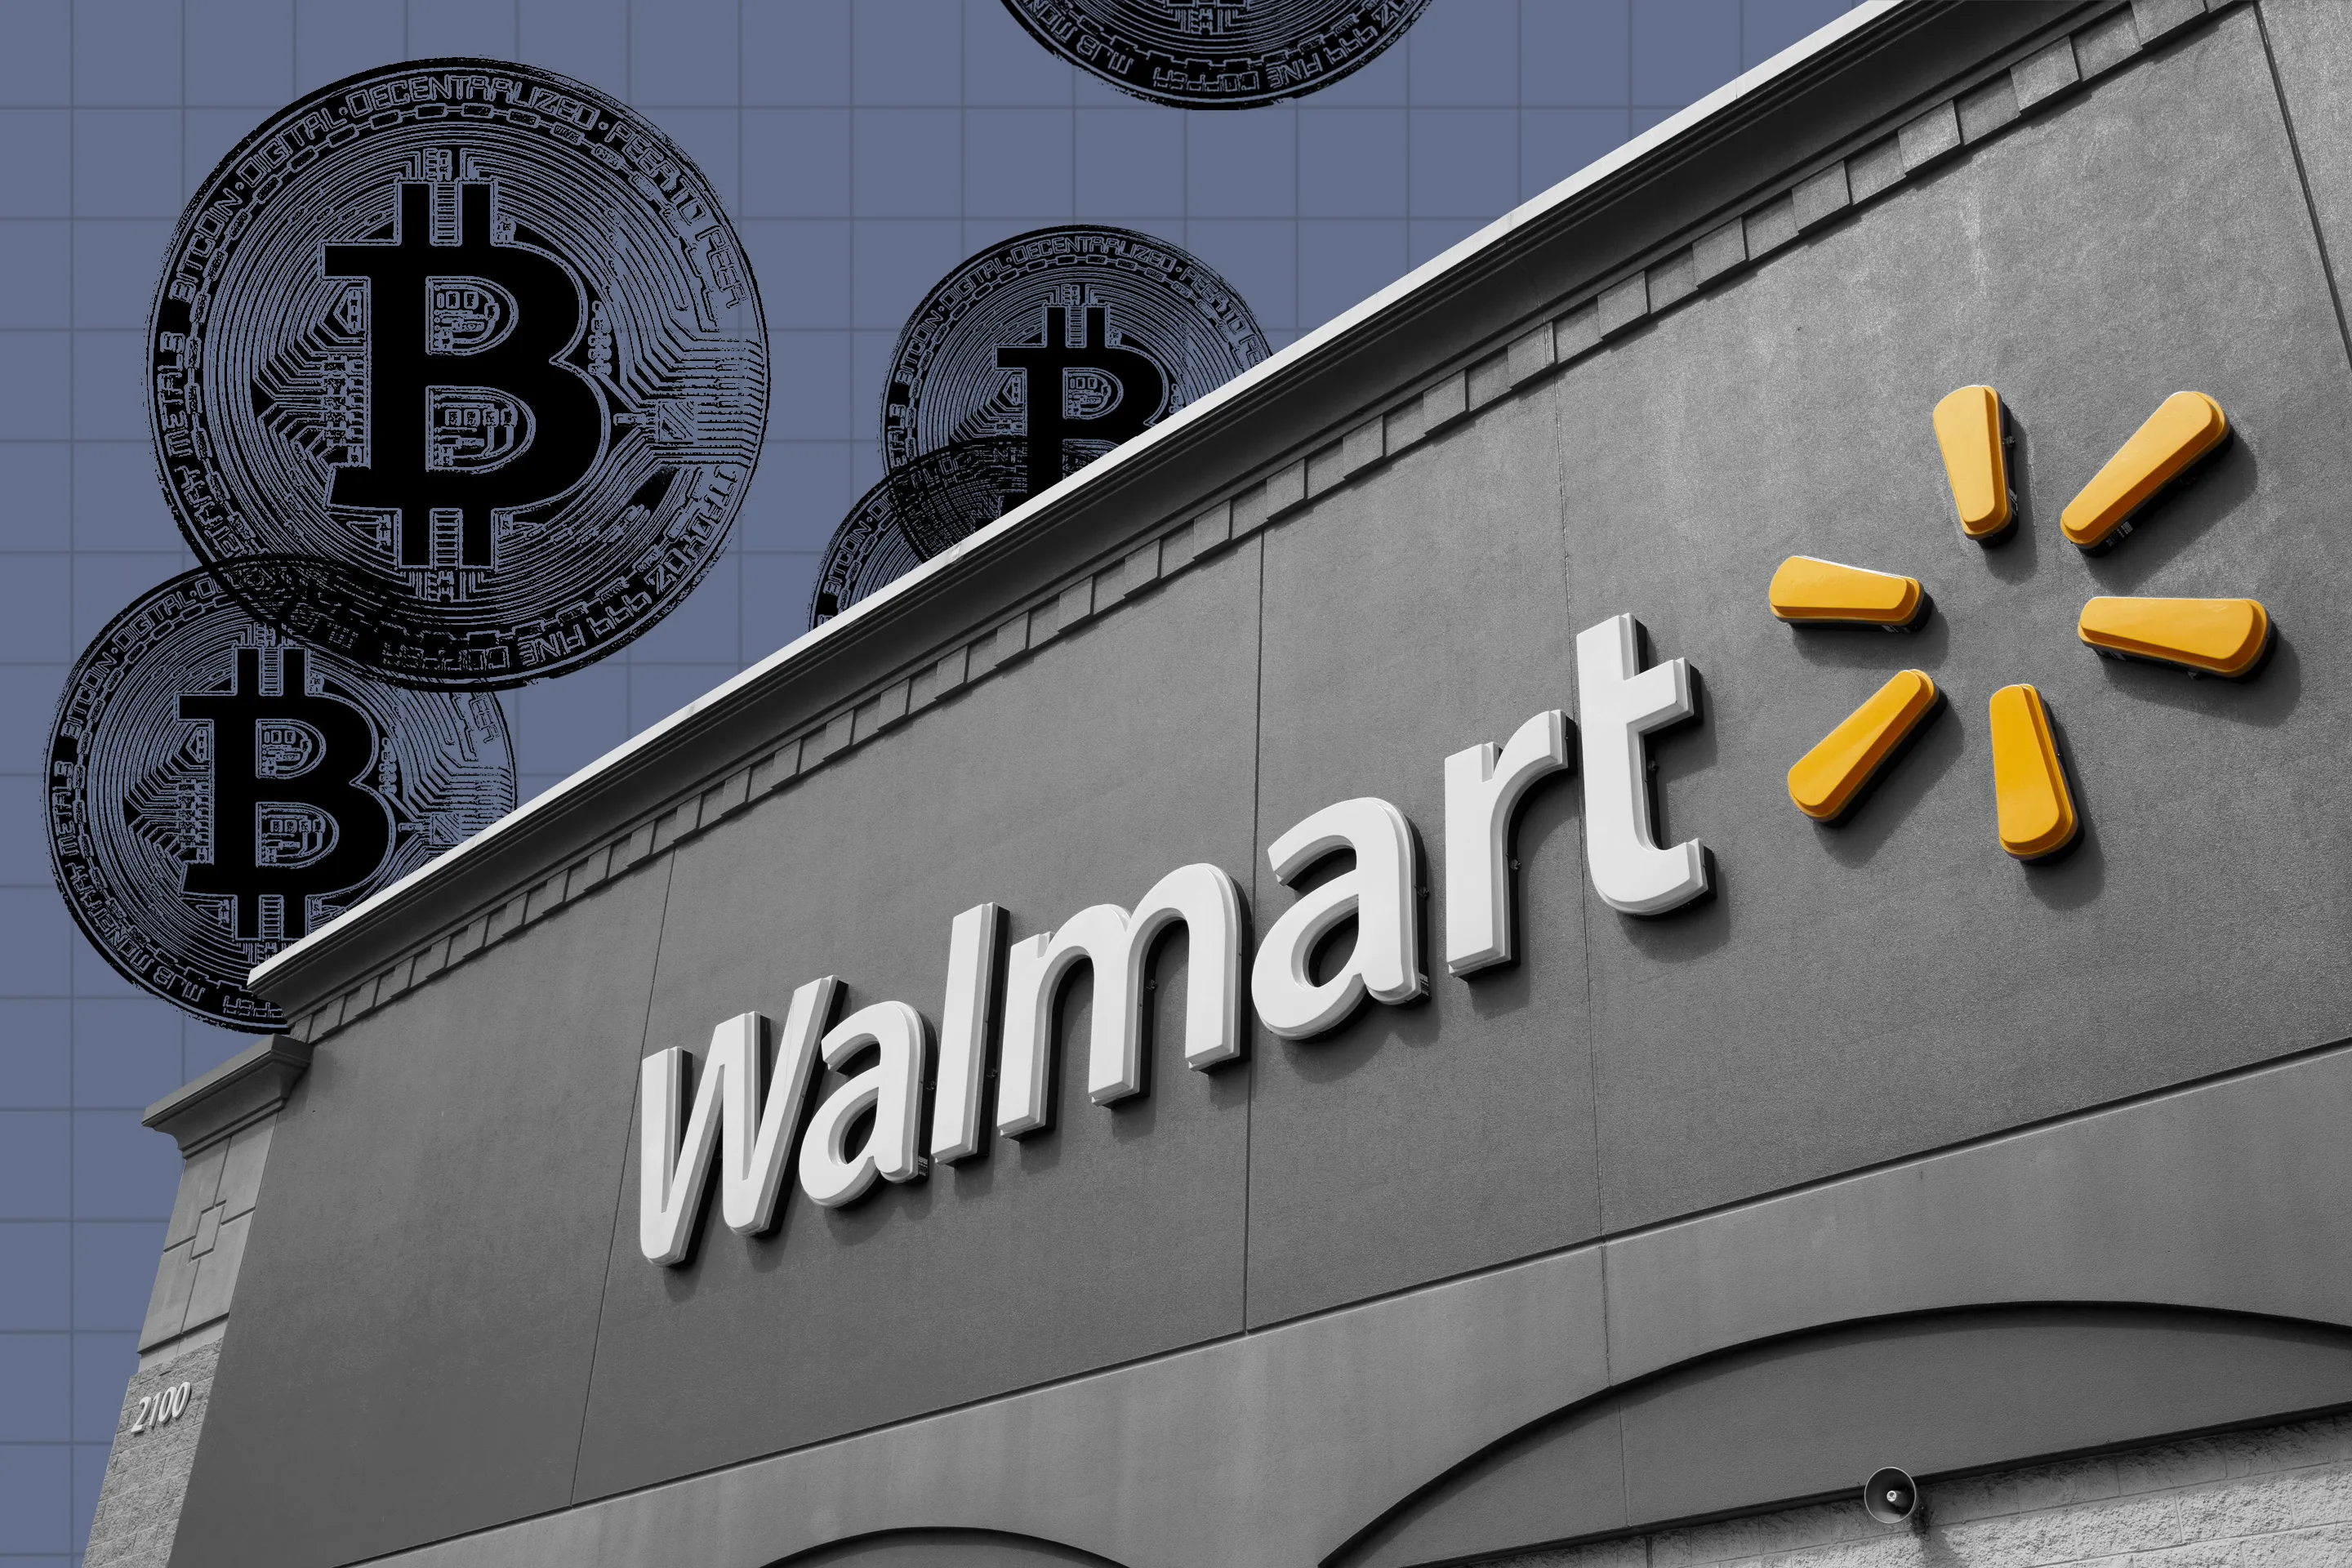 Walmart allowing some shoppers to buy bitcoin at Coinstar kiosks | Reuters